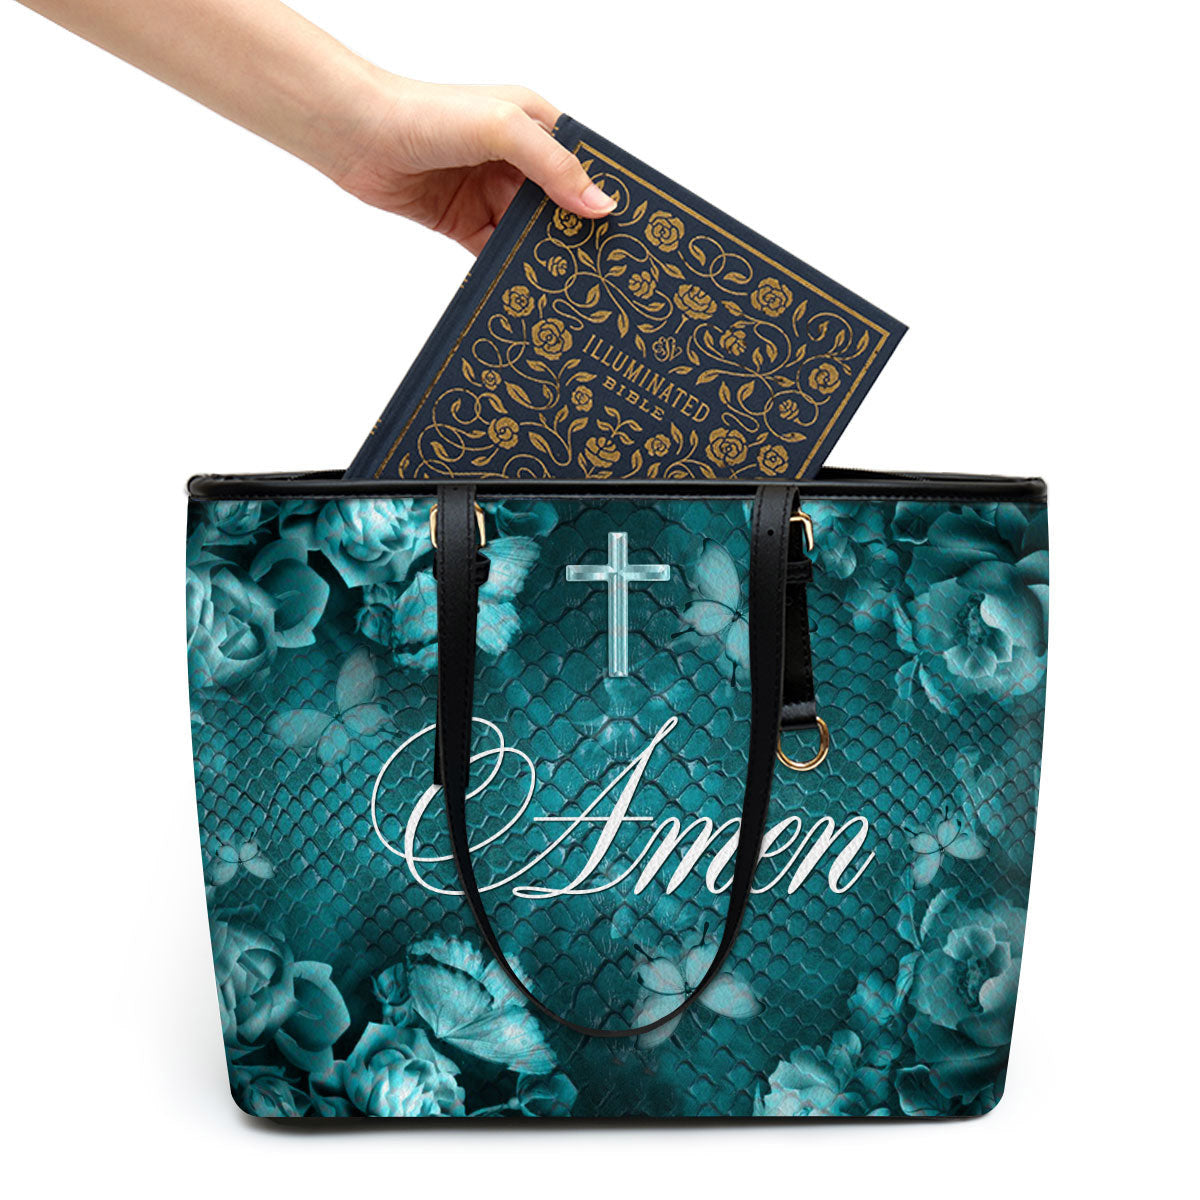 Cross Amen Large Leather Tote Bag - Christ Gifts For Religious Women - Best Mother's Day Gifts